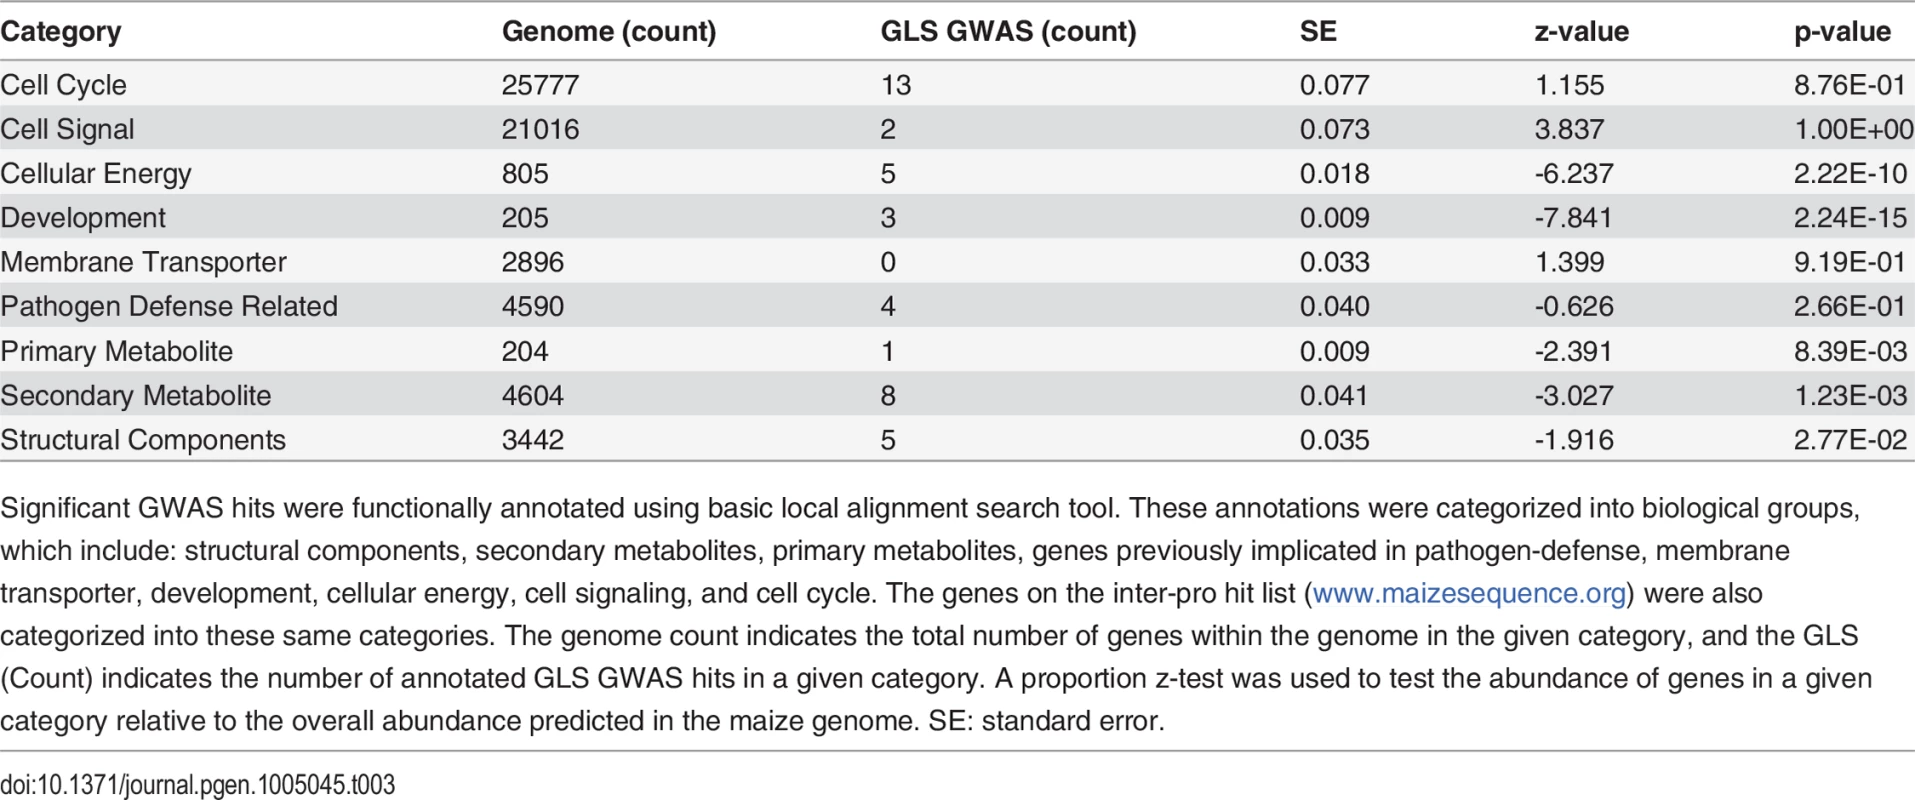 Summary statistics of functionally annotated and categorized genome wide association hits.